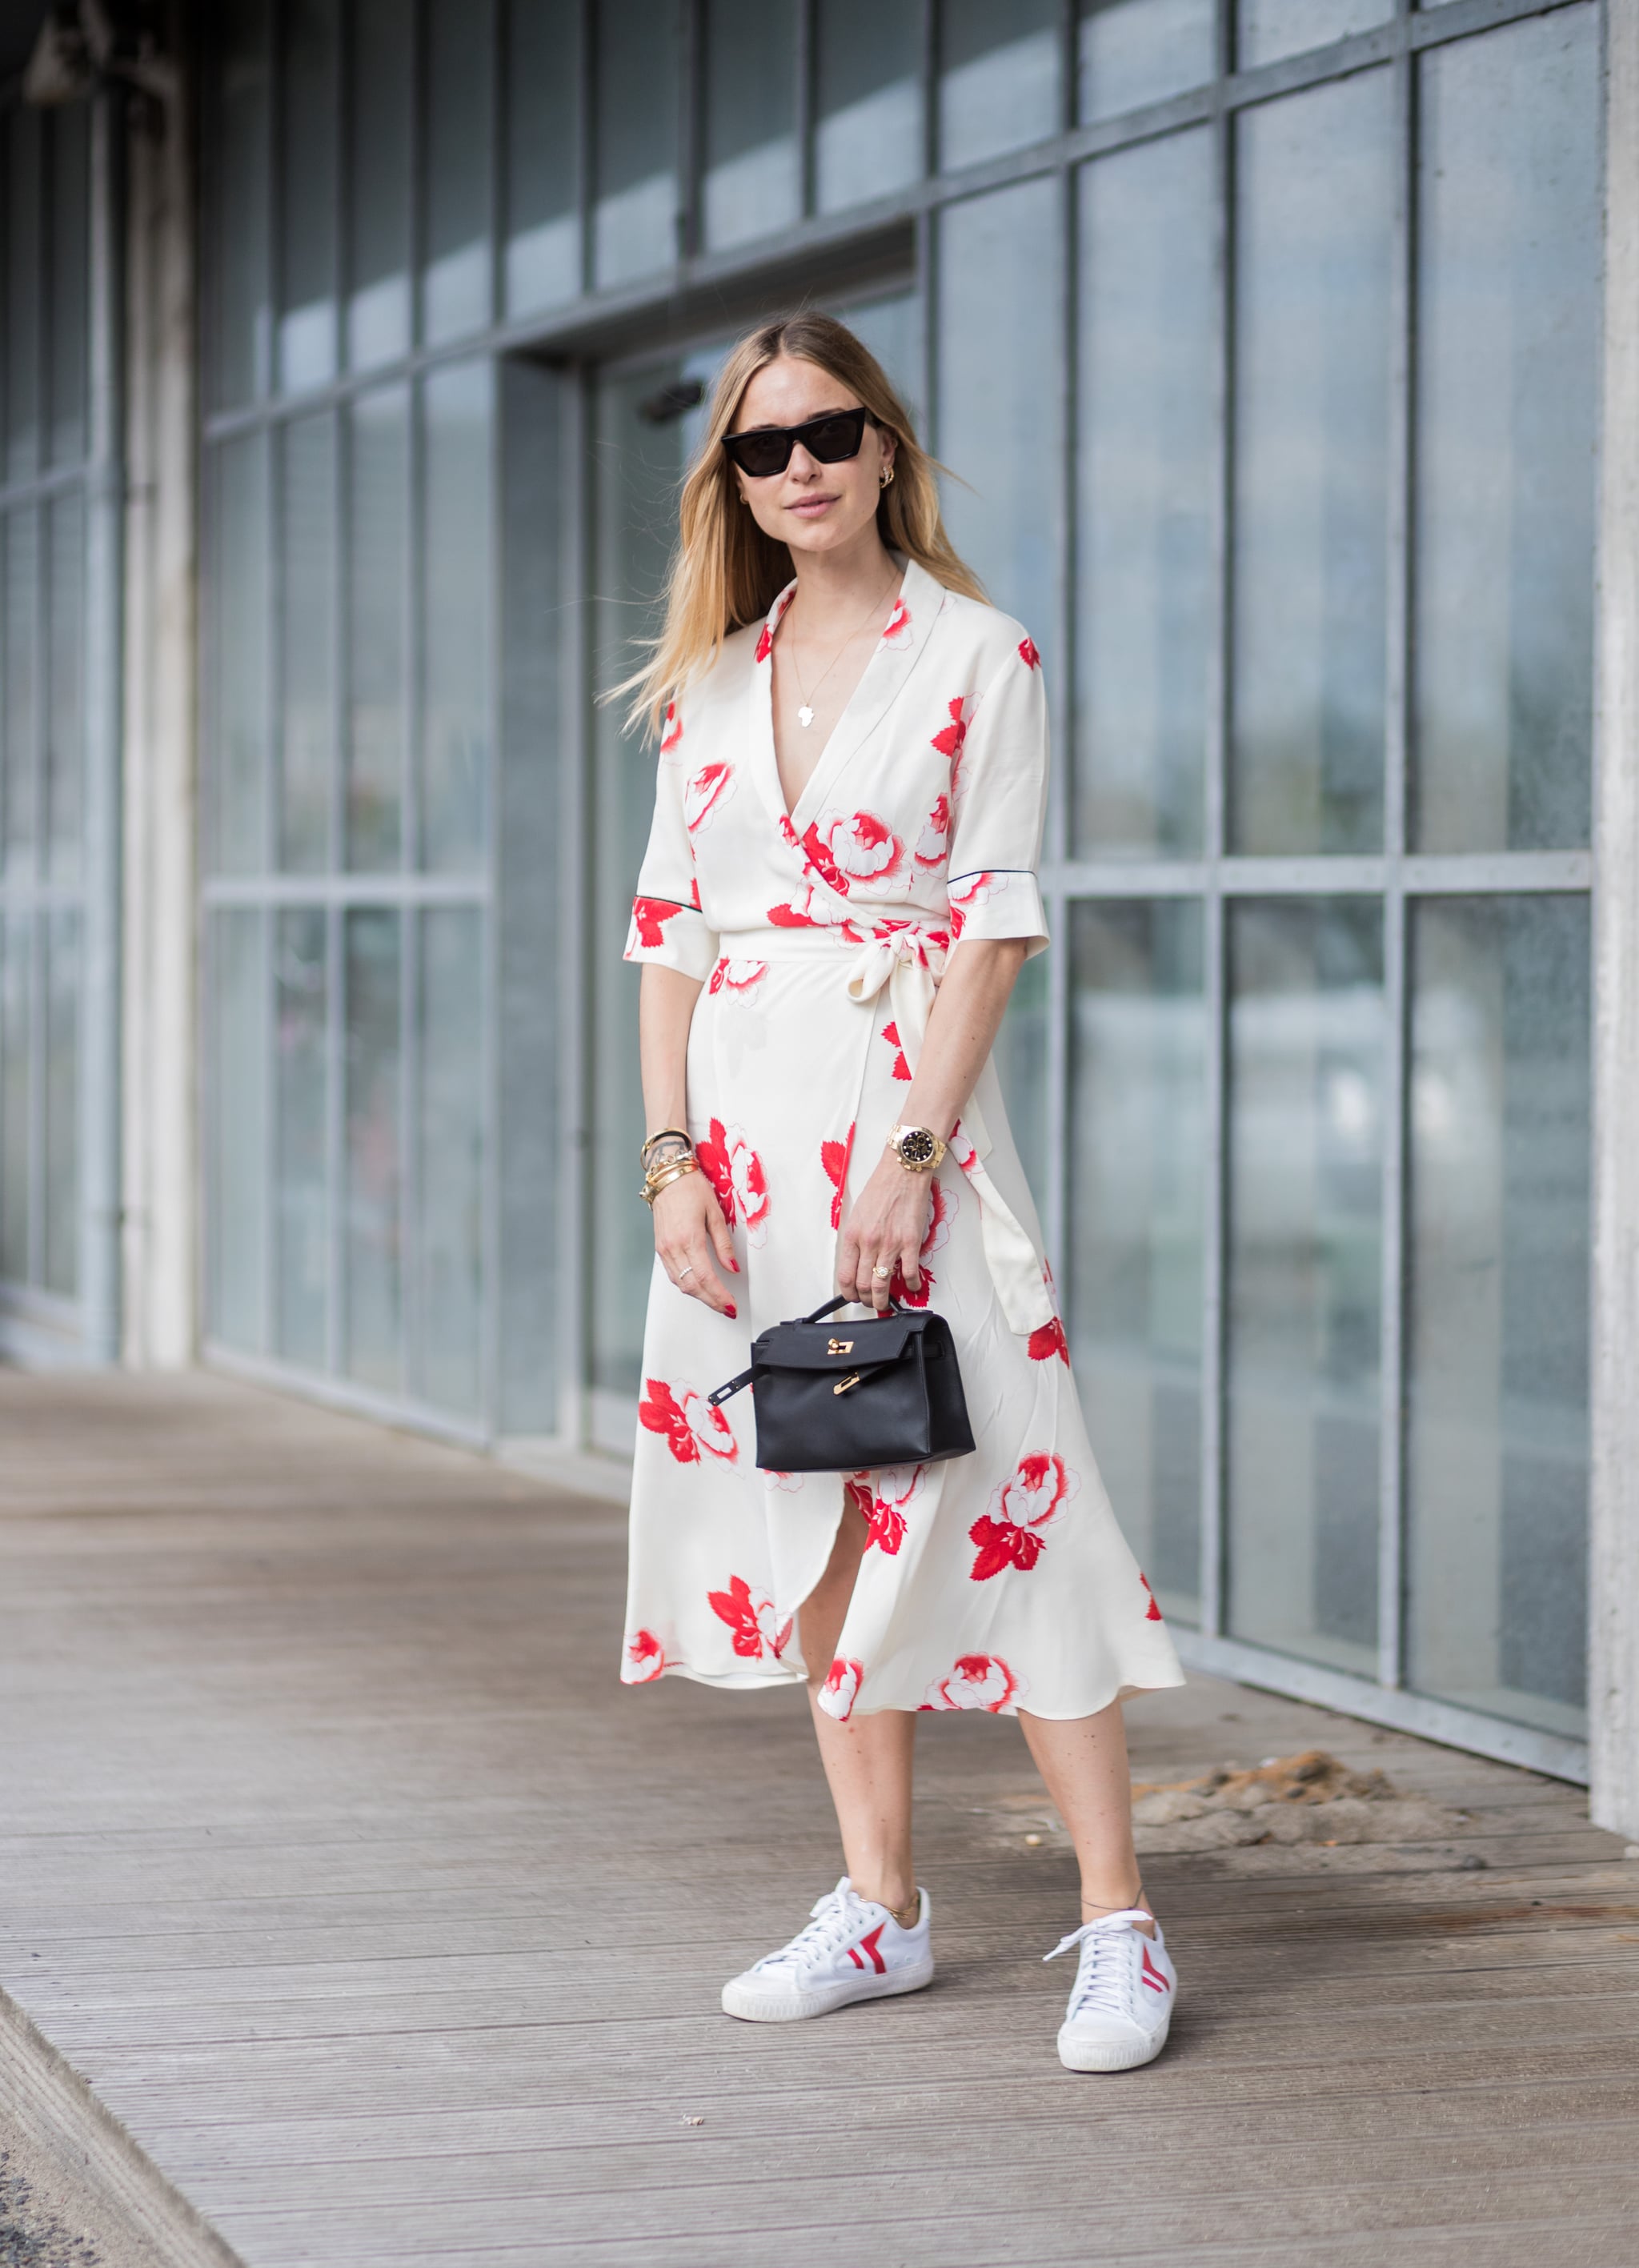 dresses to wear with white sneakers